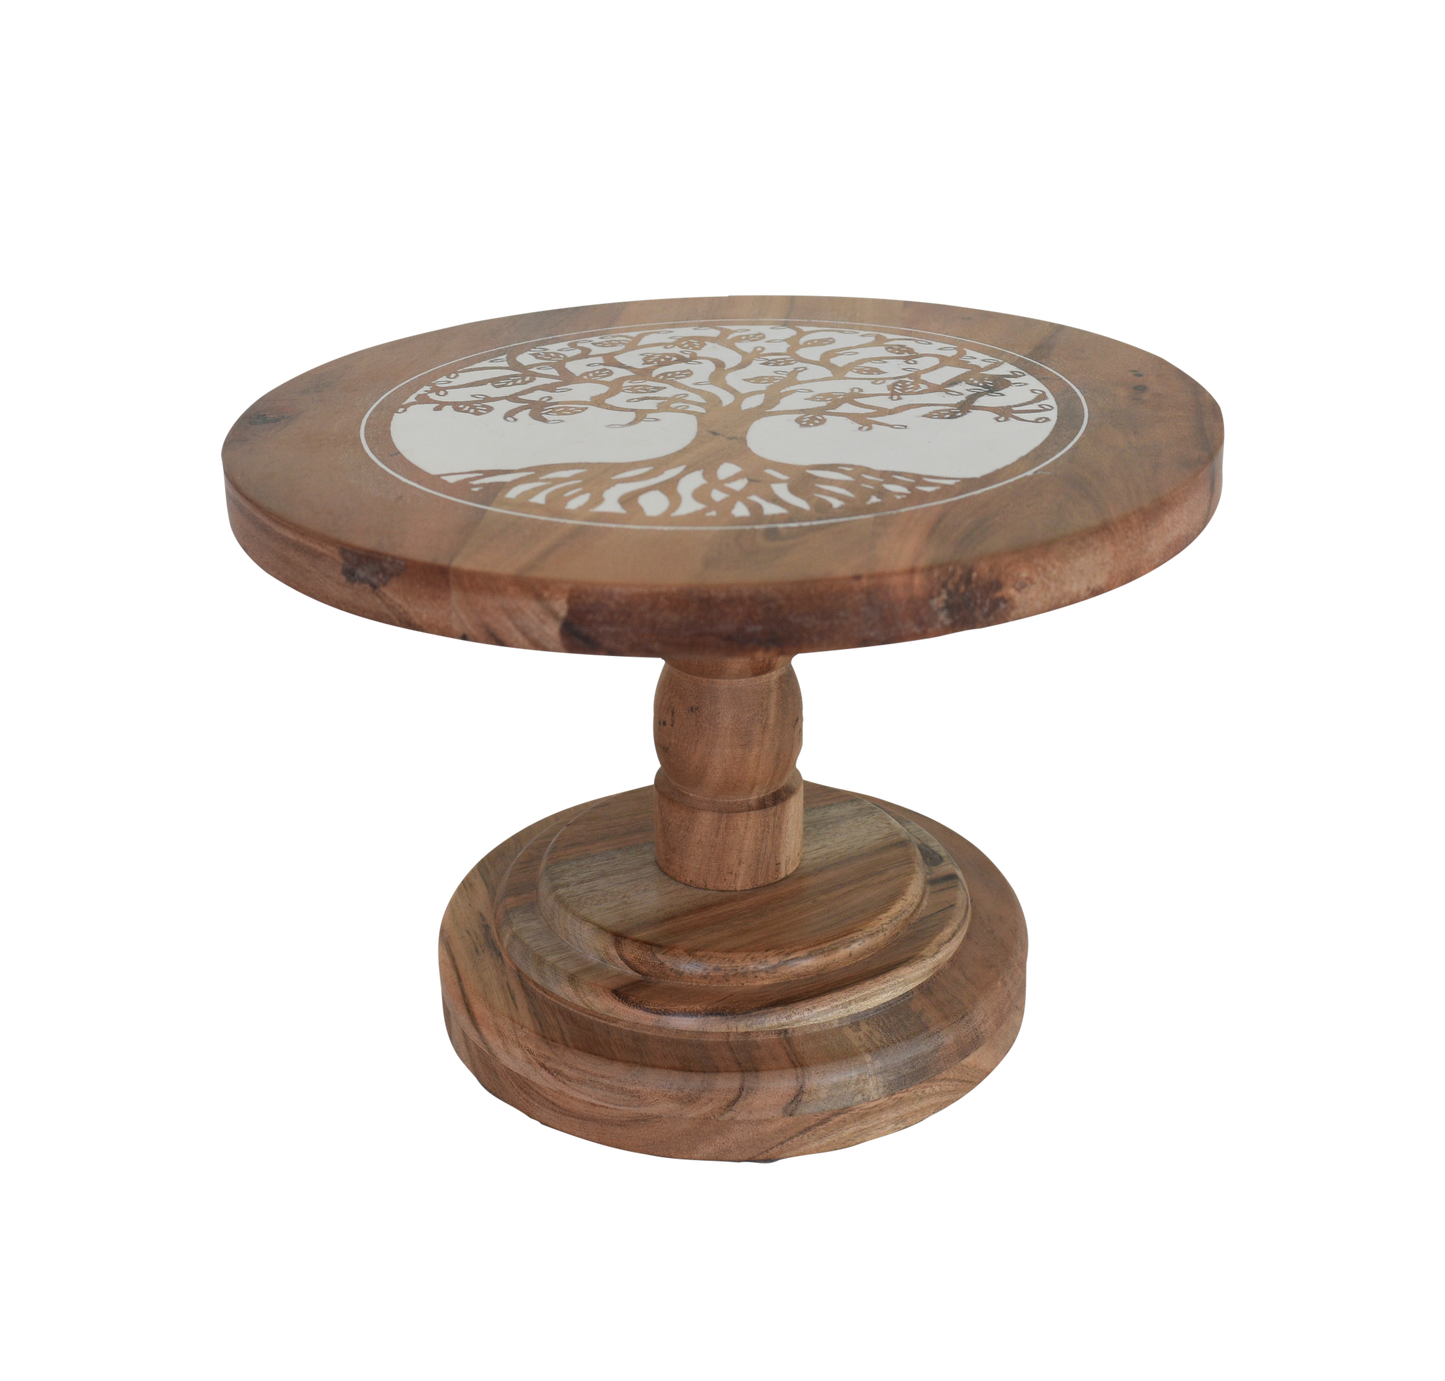 Spiritual Accents Tree of Life Table Stand